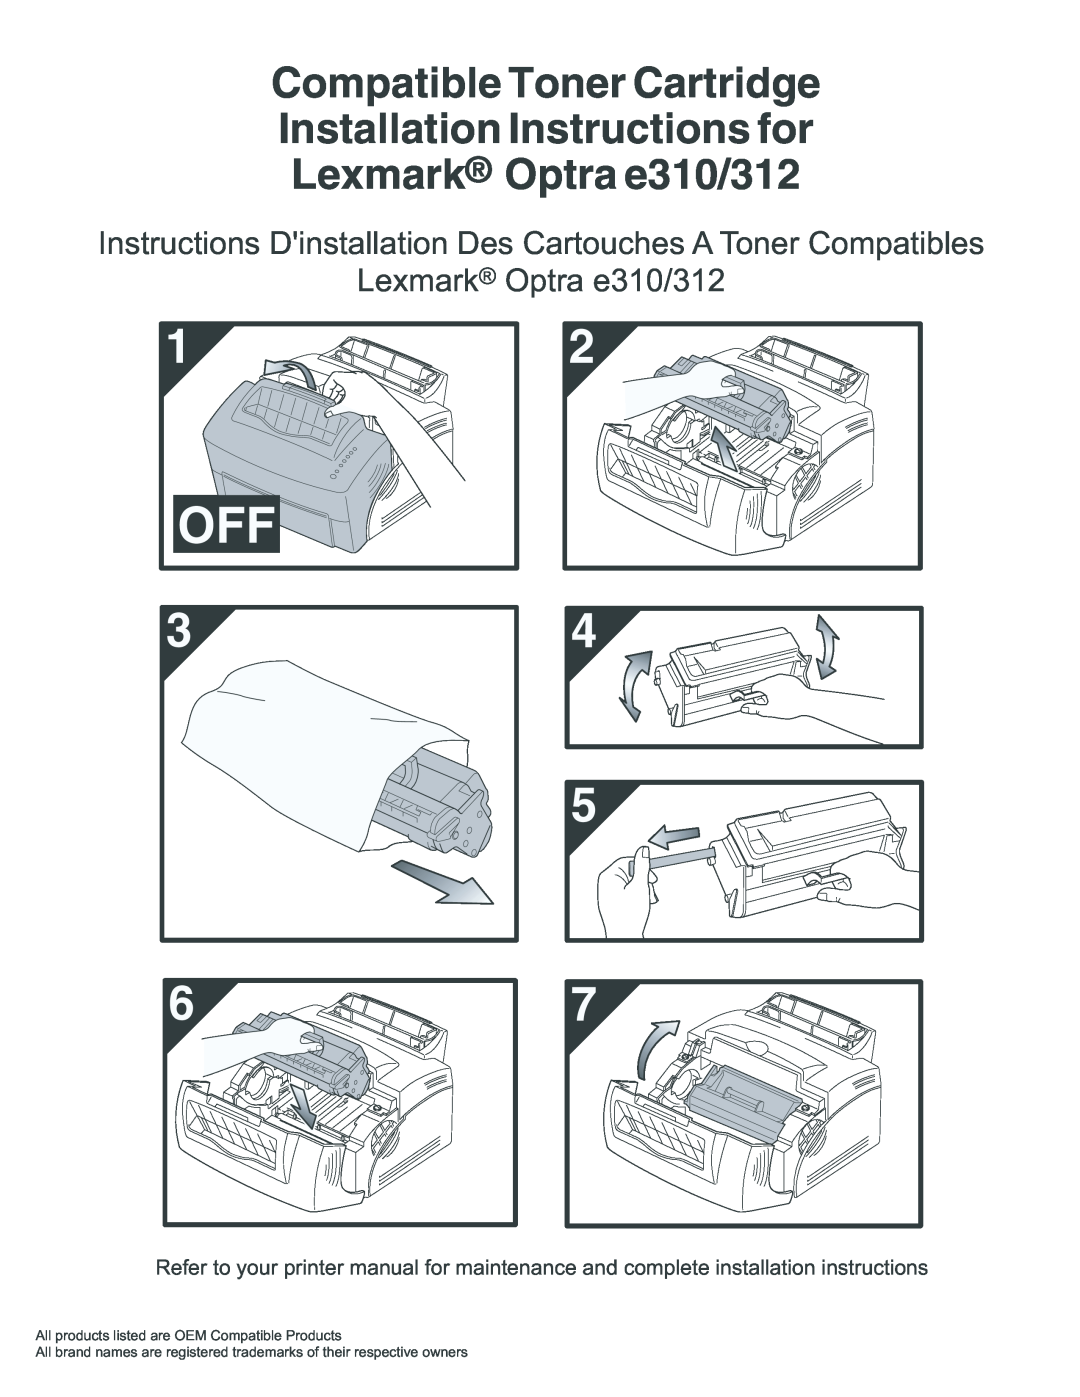 Lexmark installation instructions Compatible Toner Cartridge, Installation Instructions for, Lexmark Optra e310/312 